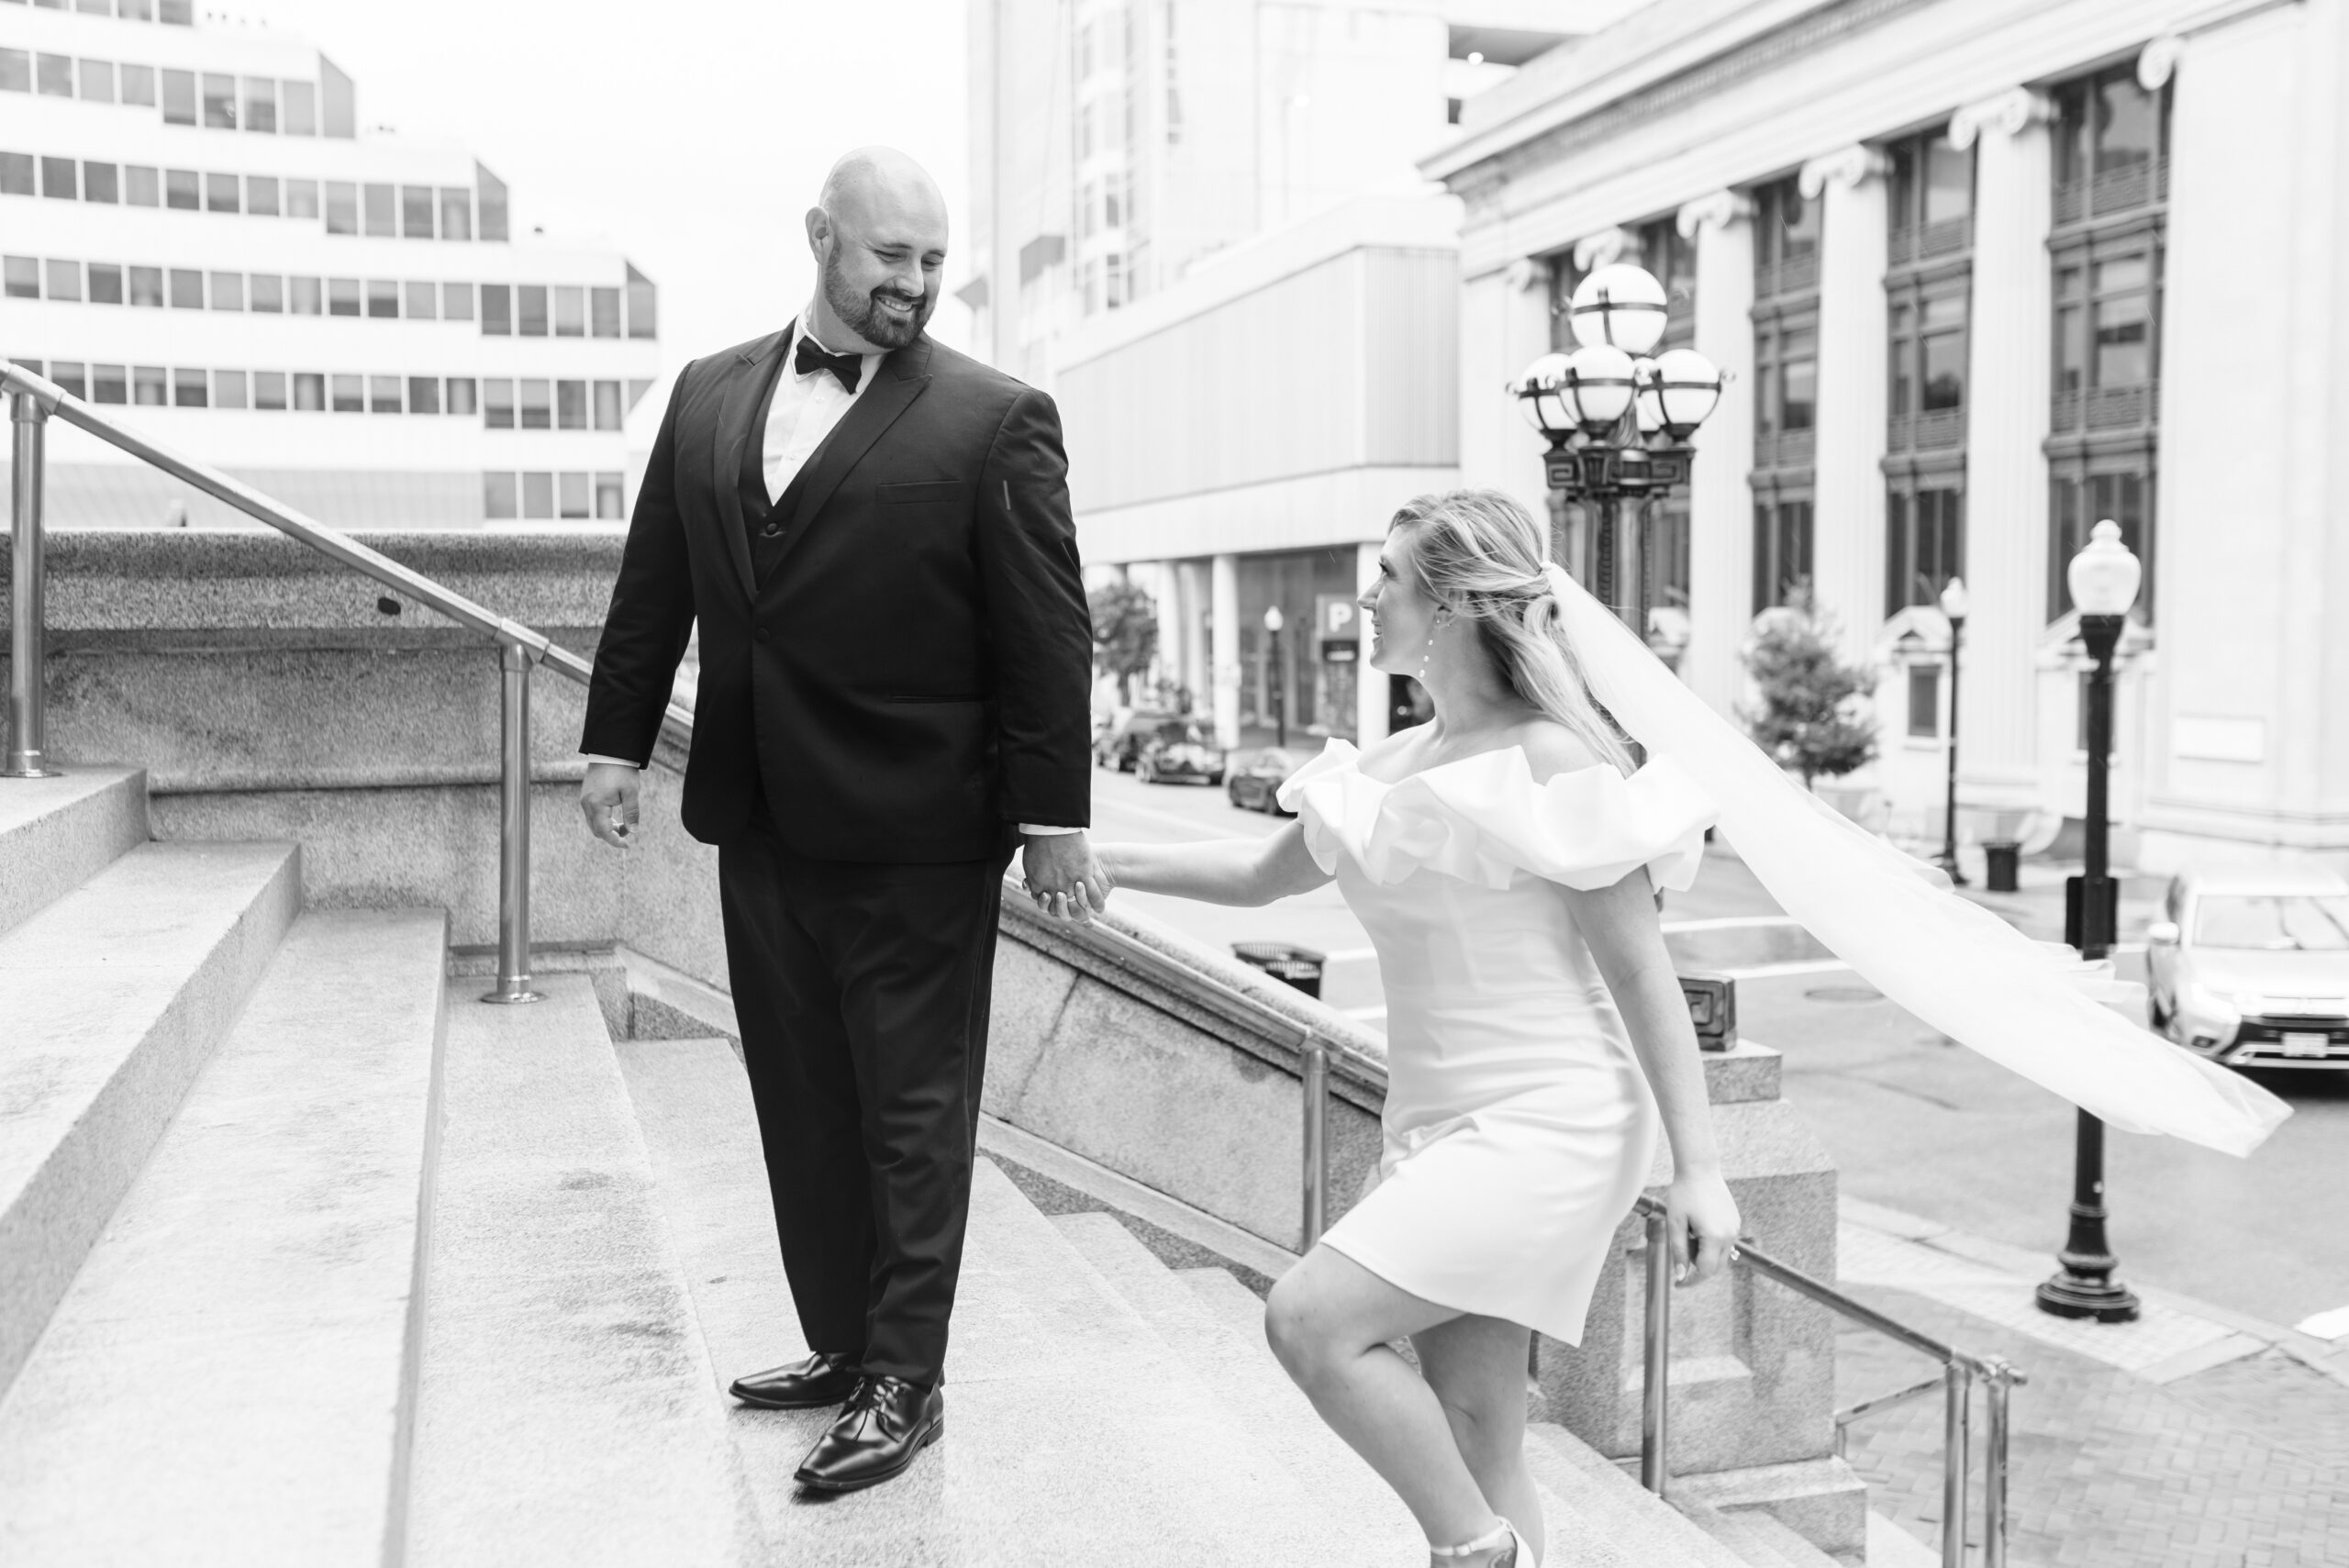 Bride and Groom at Downtown Norfolk Elopement